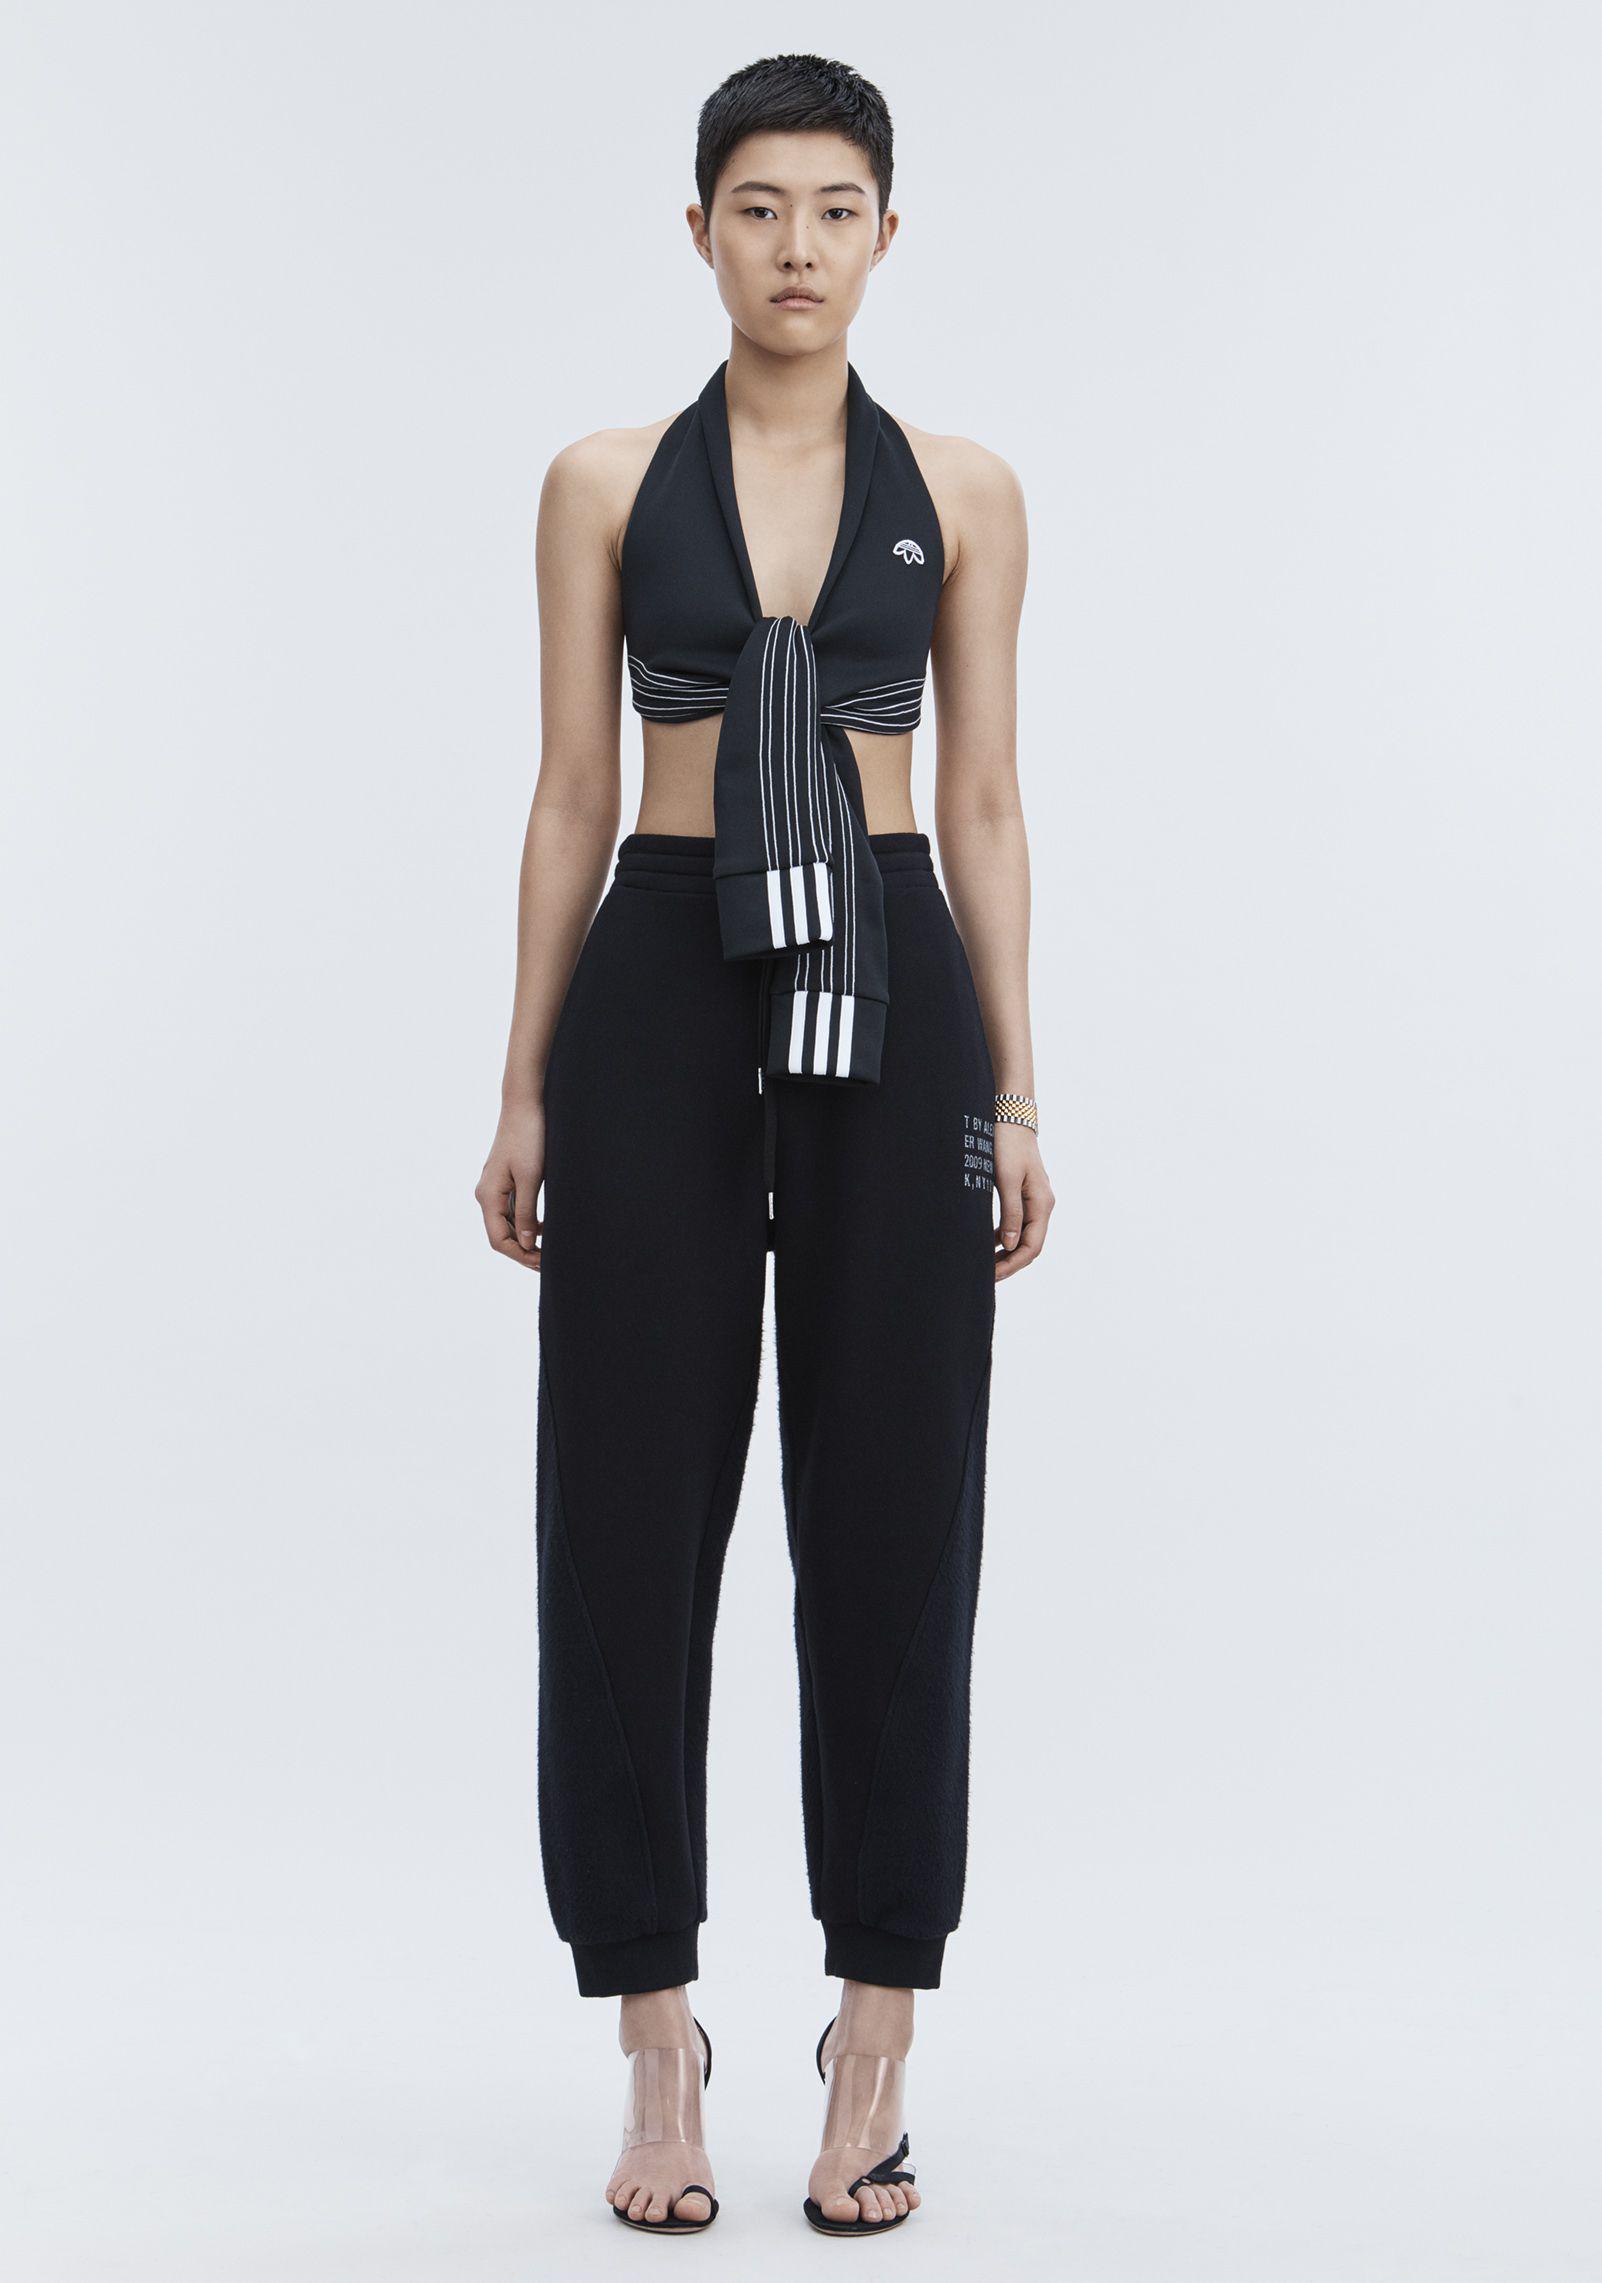 Alexander Wang Synthetic Adidas Originals By Aw Bra in Black - Lyst